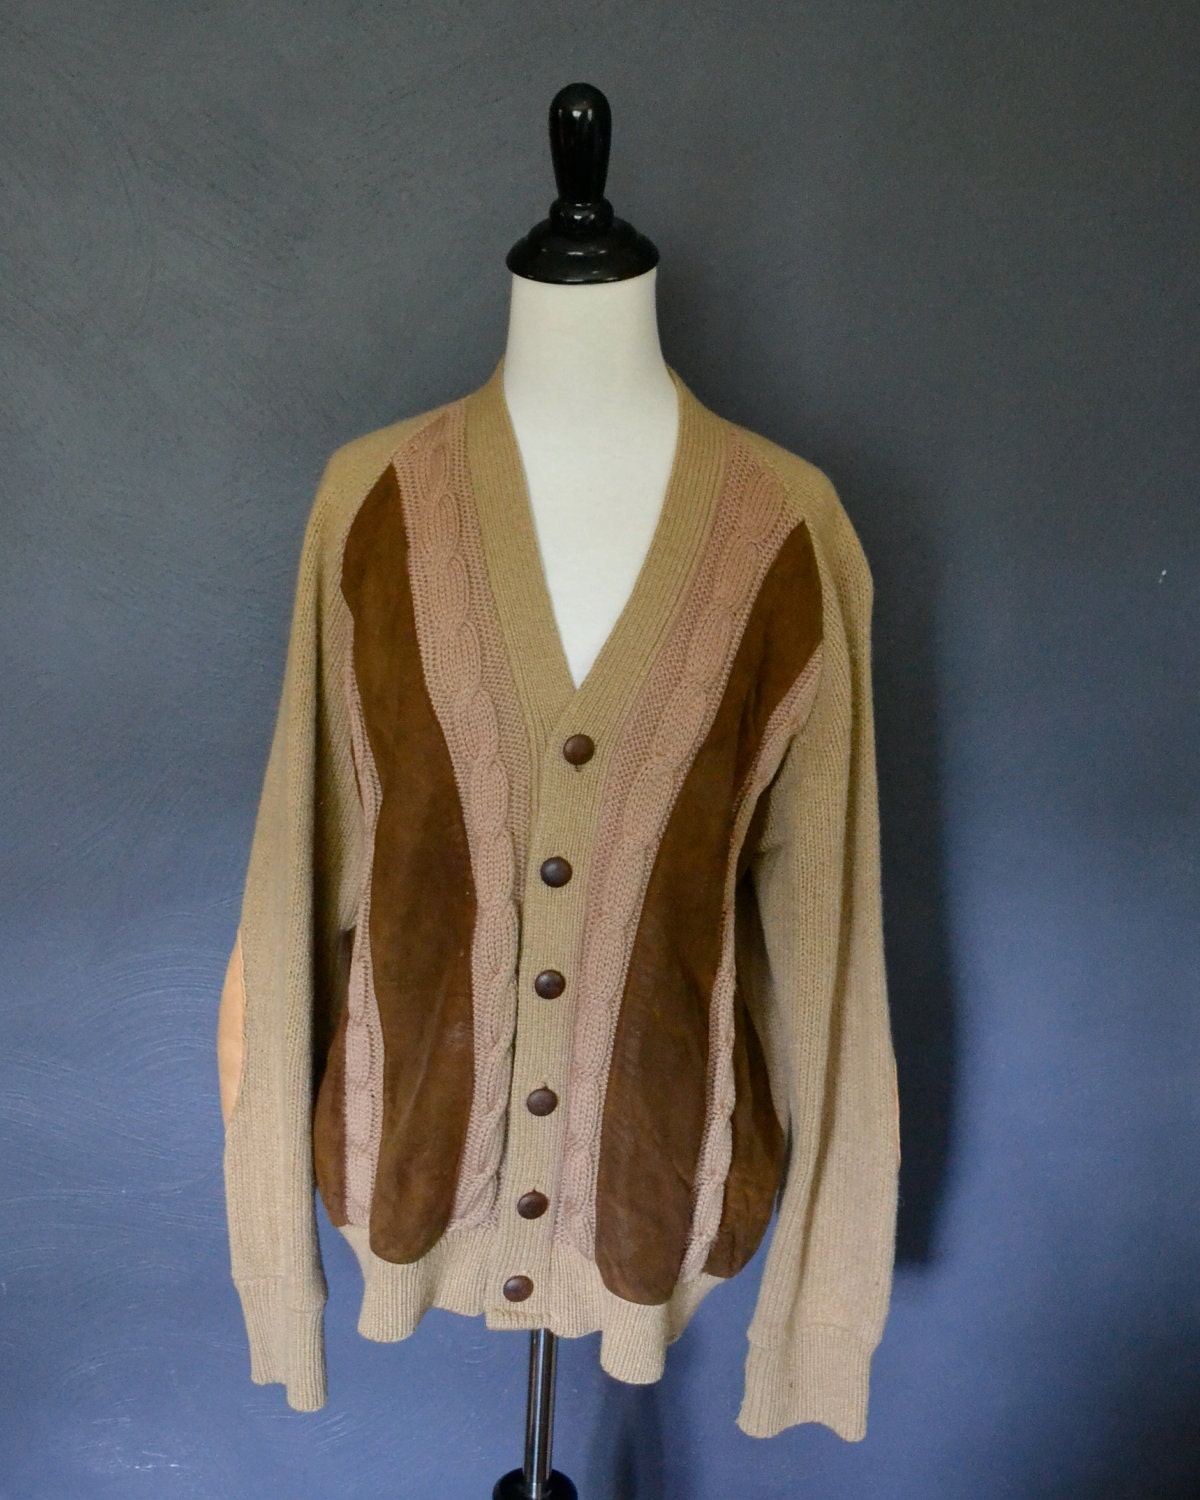 Vintage Tan Grandpa Cardigan with Suede Elbow Patches